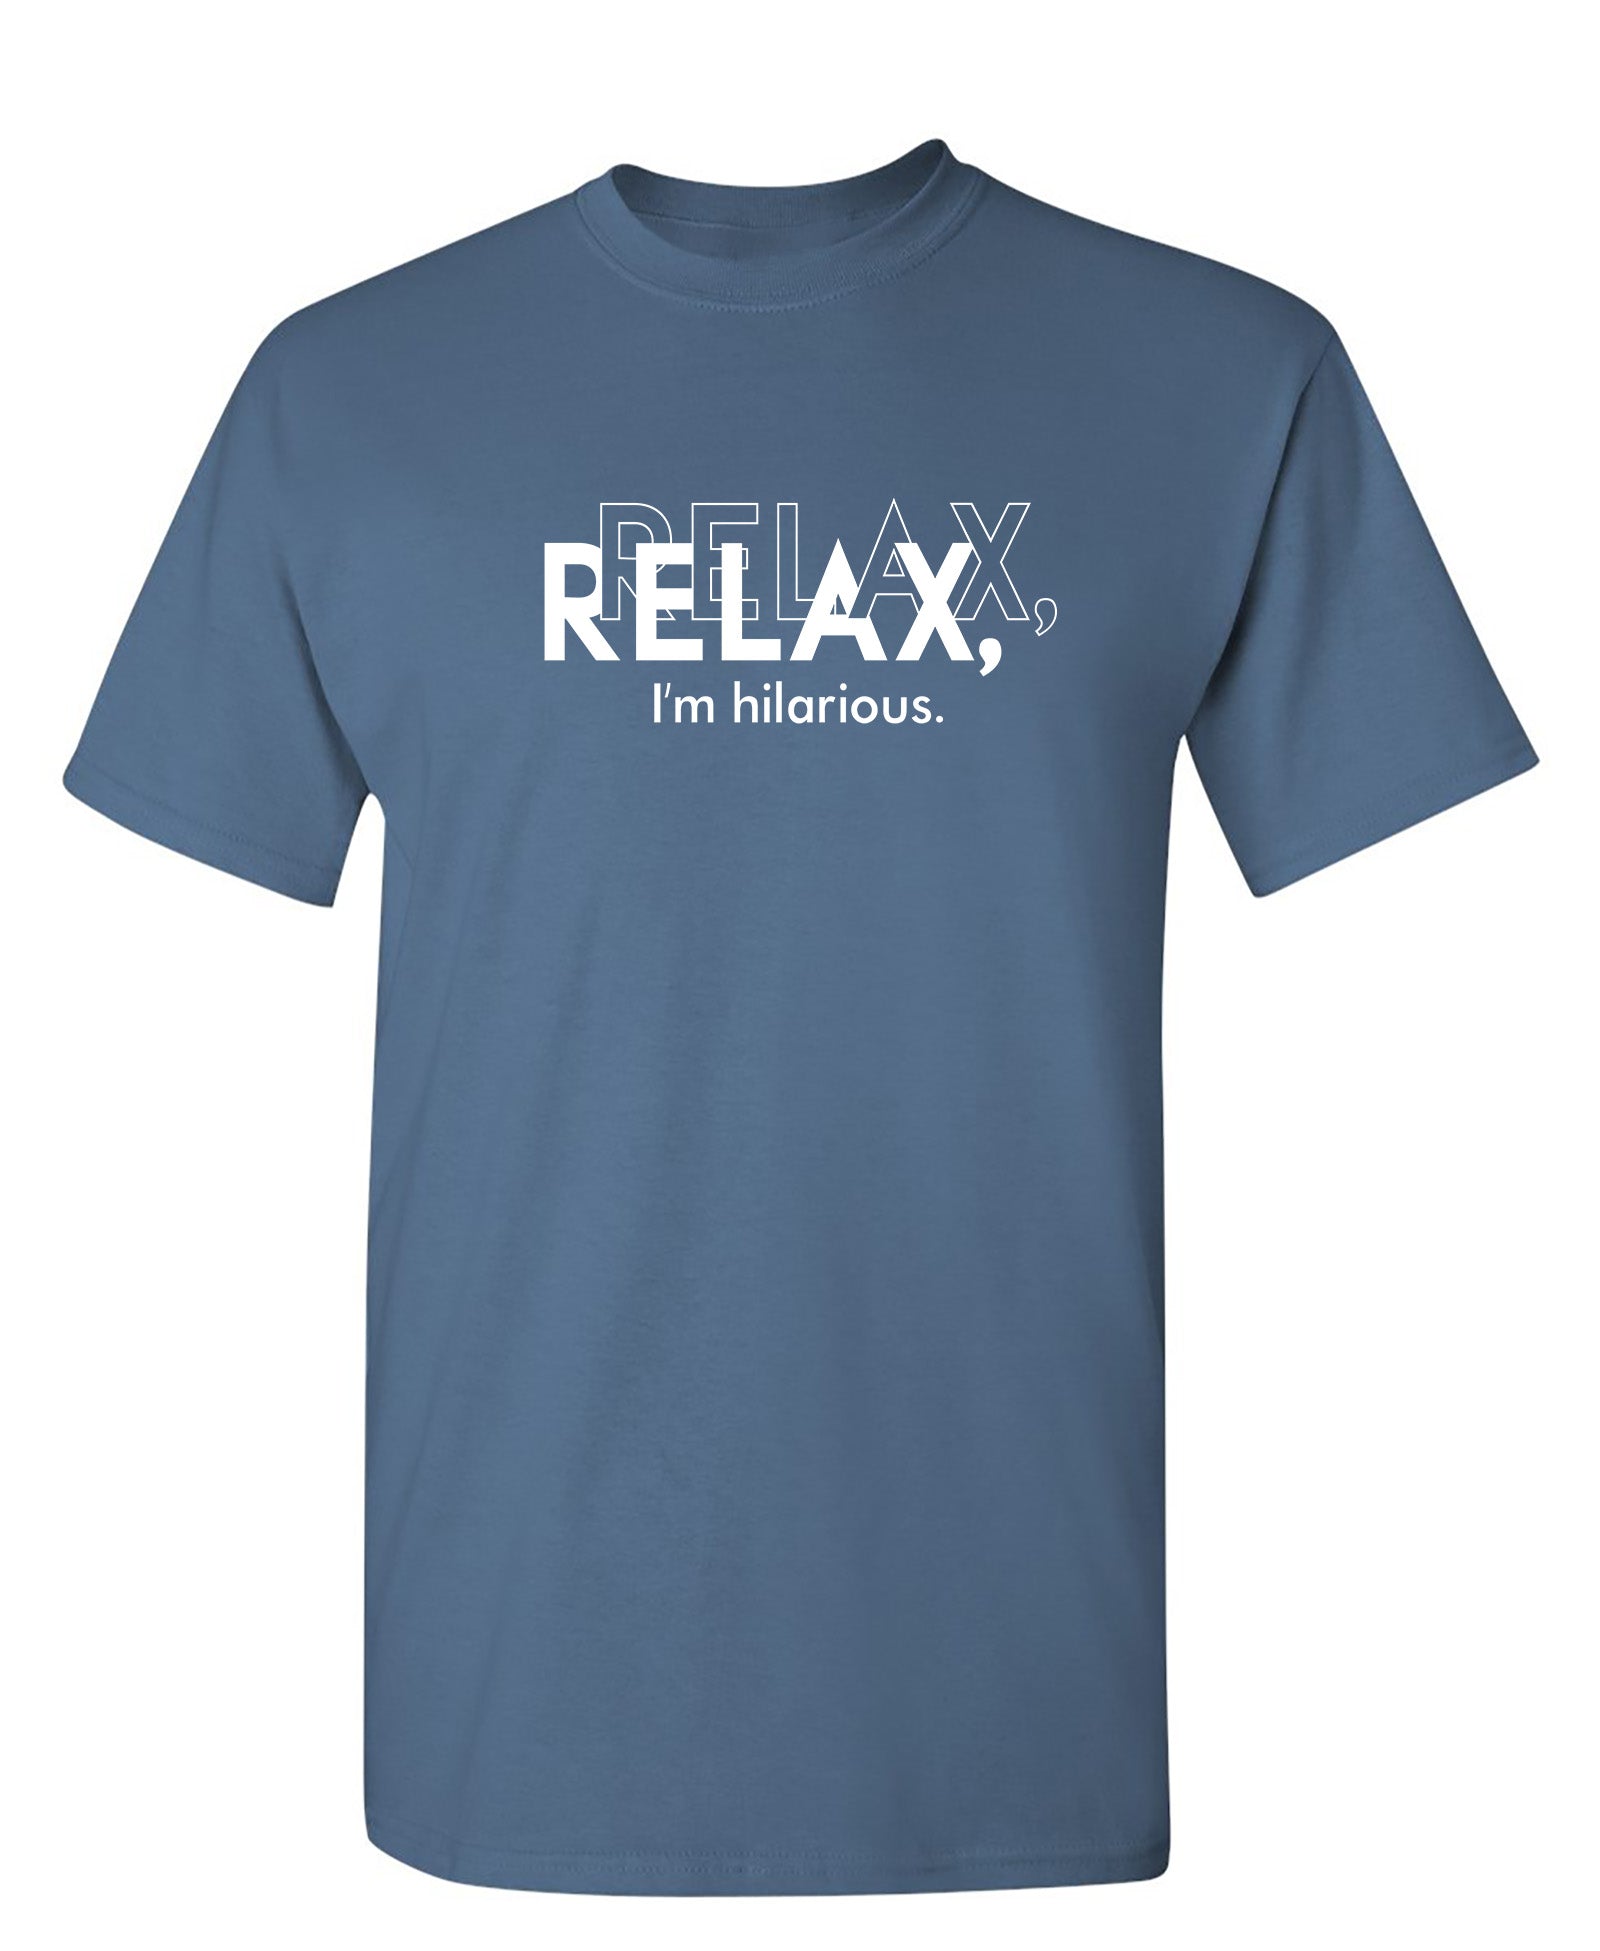 RELAX HILARIOUS - Funny T Shirts & Graphic Tees